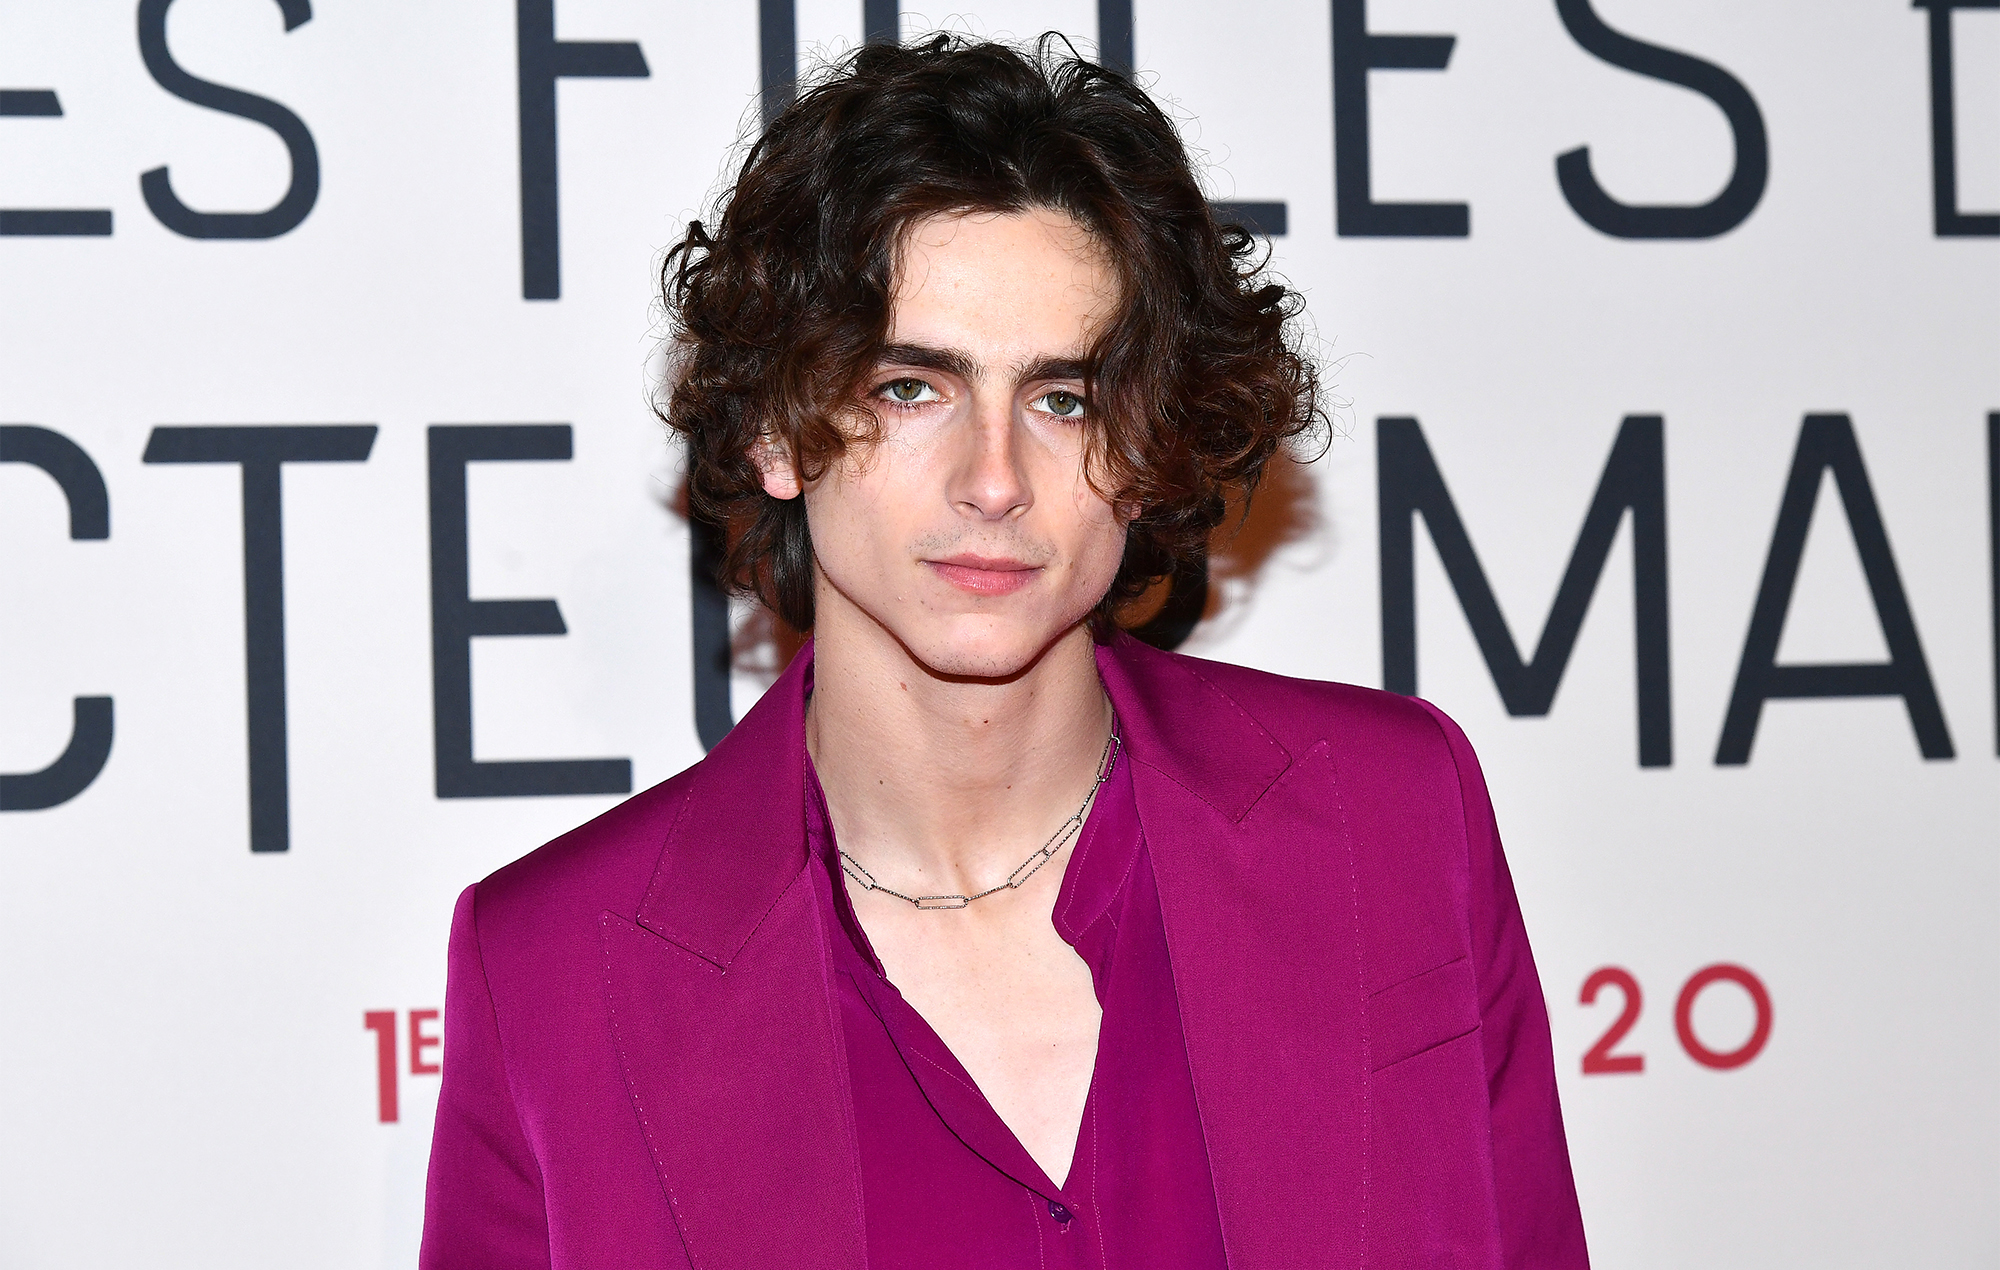 Timothy Chalamet is said to have been looking forward to playing Willy Wonka in a new prequel